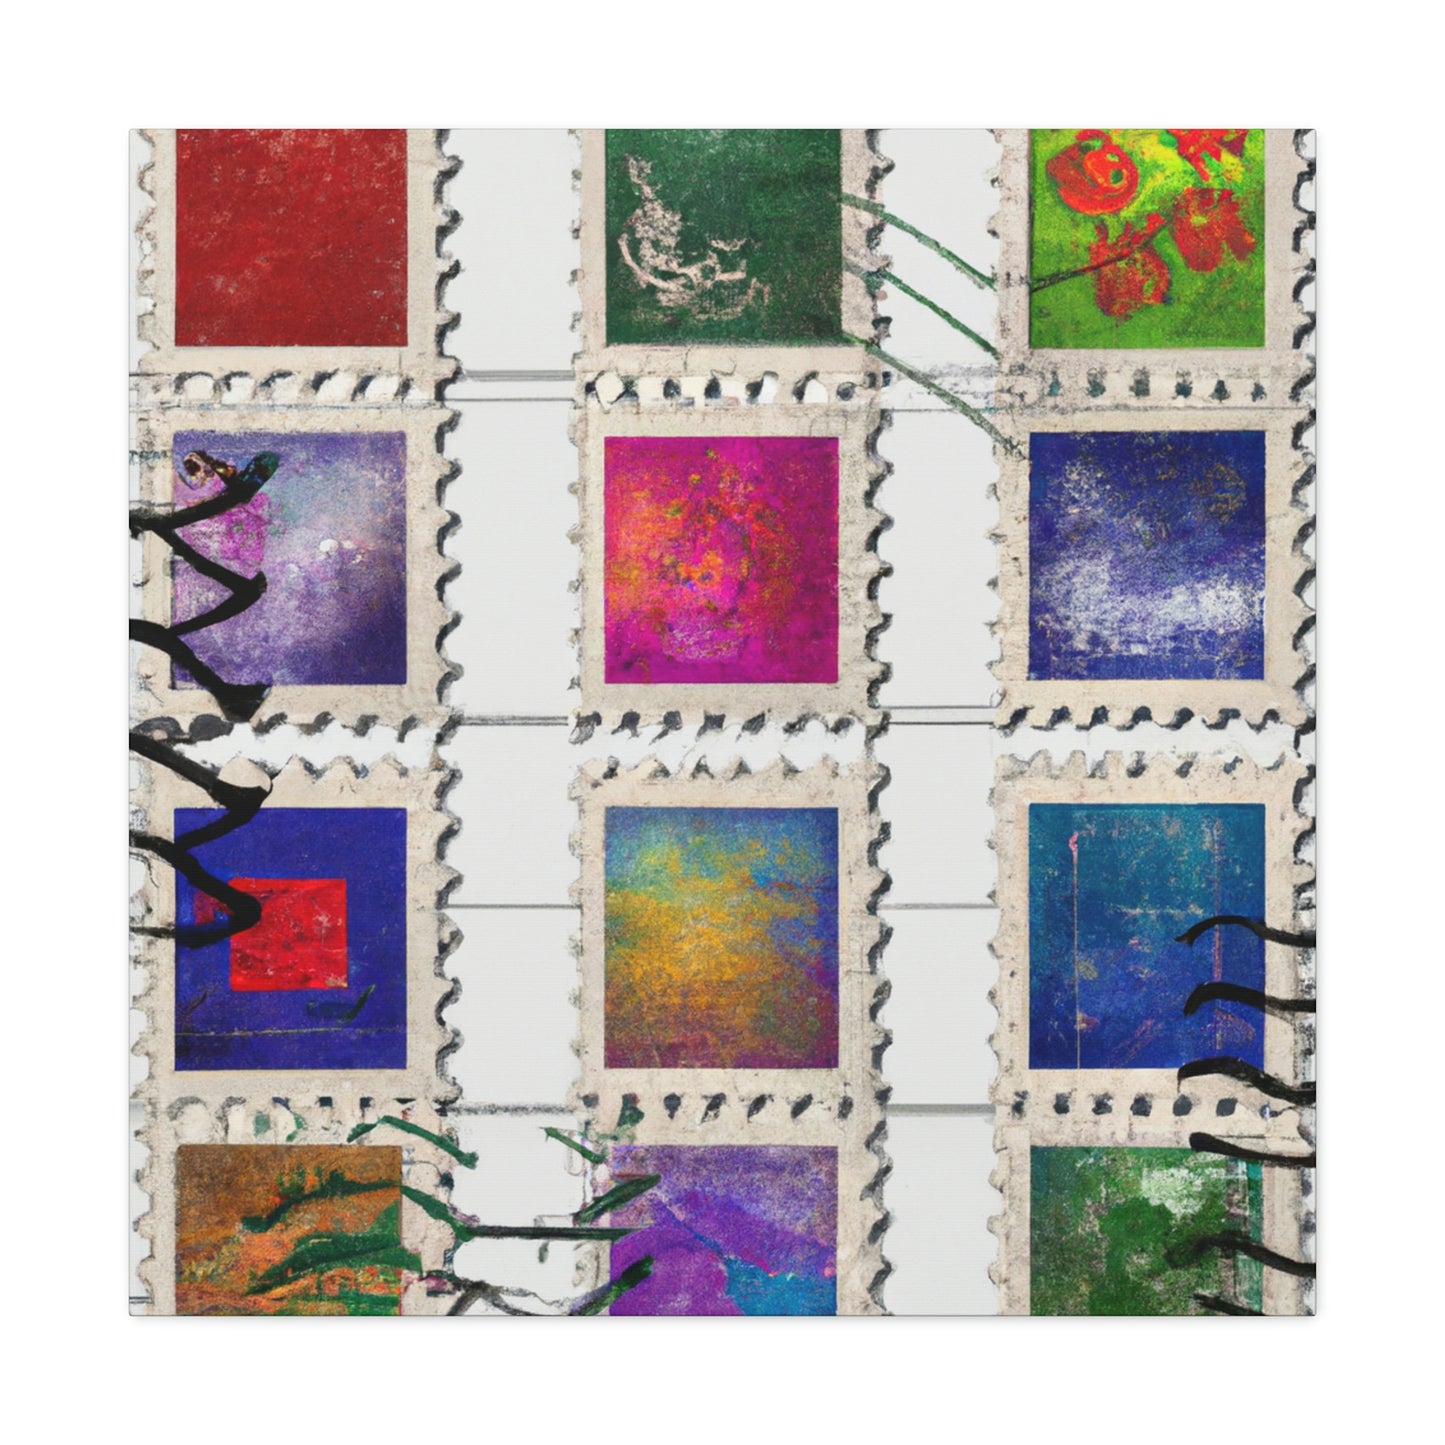 "Cultural Treasures". - Postage Stamp Collector Canvas Wall Art